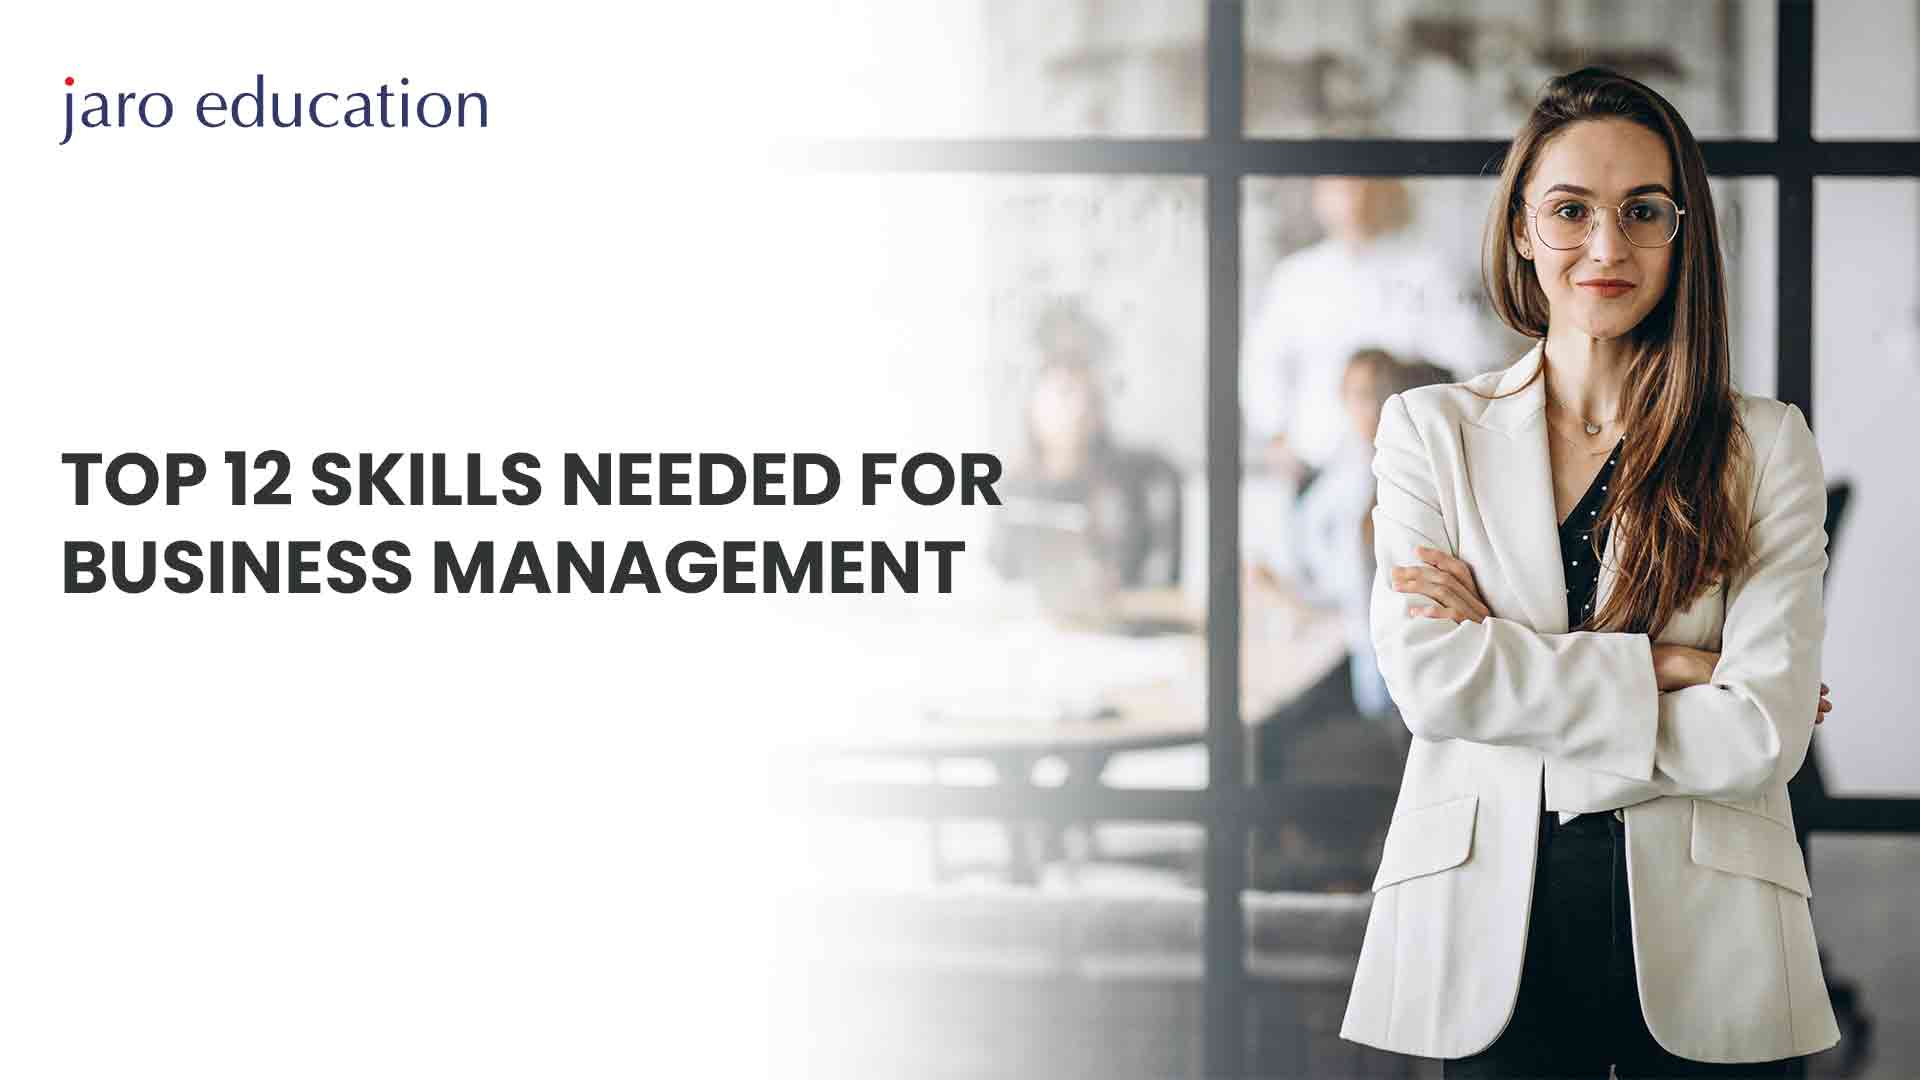 Top 12 Skills Needed for Business Management